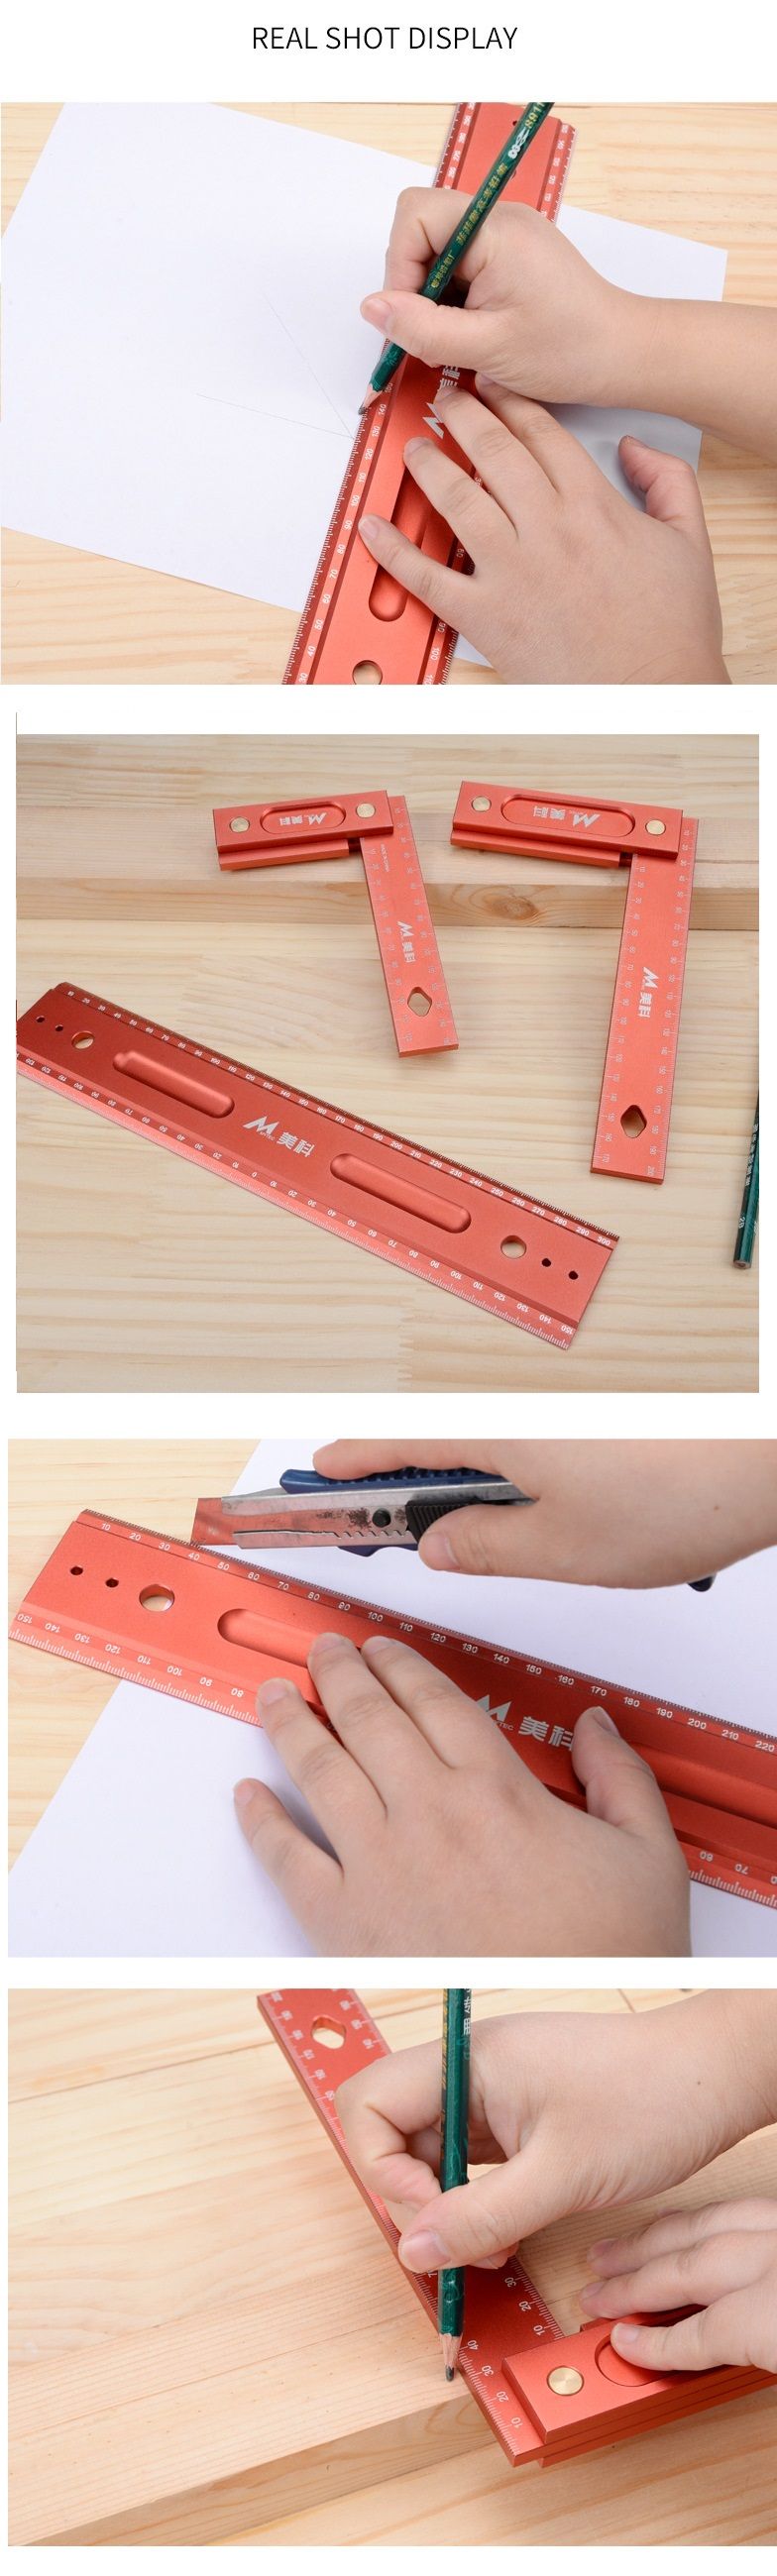 200mm-Aluminum-Alloy-Square-High-Precision-90-Degree-Carpenters-Rule-Marking-Angle-Ruler-Wide-Base-R-1665892